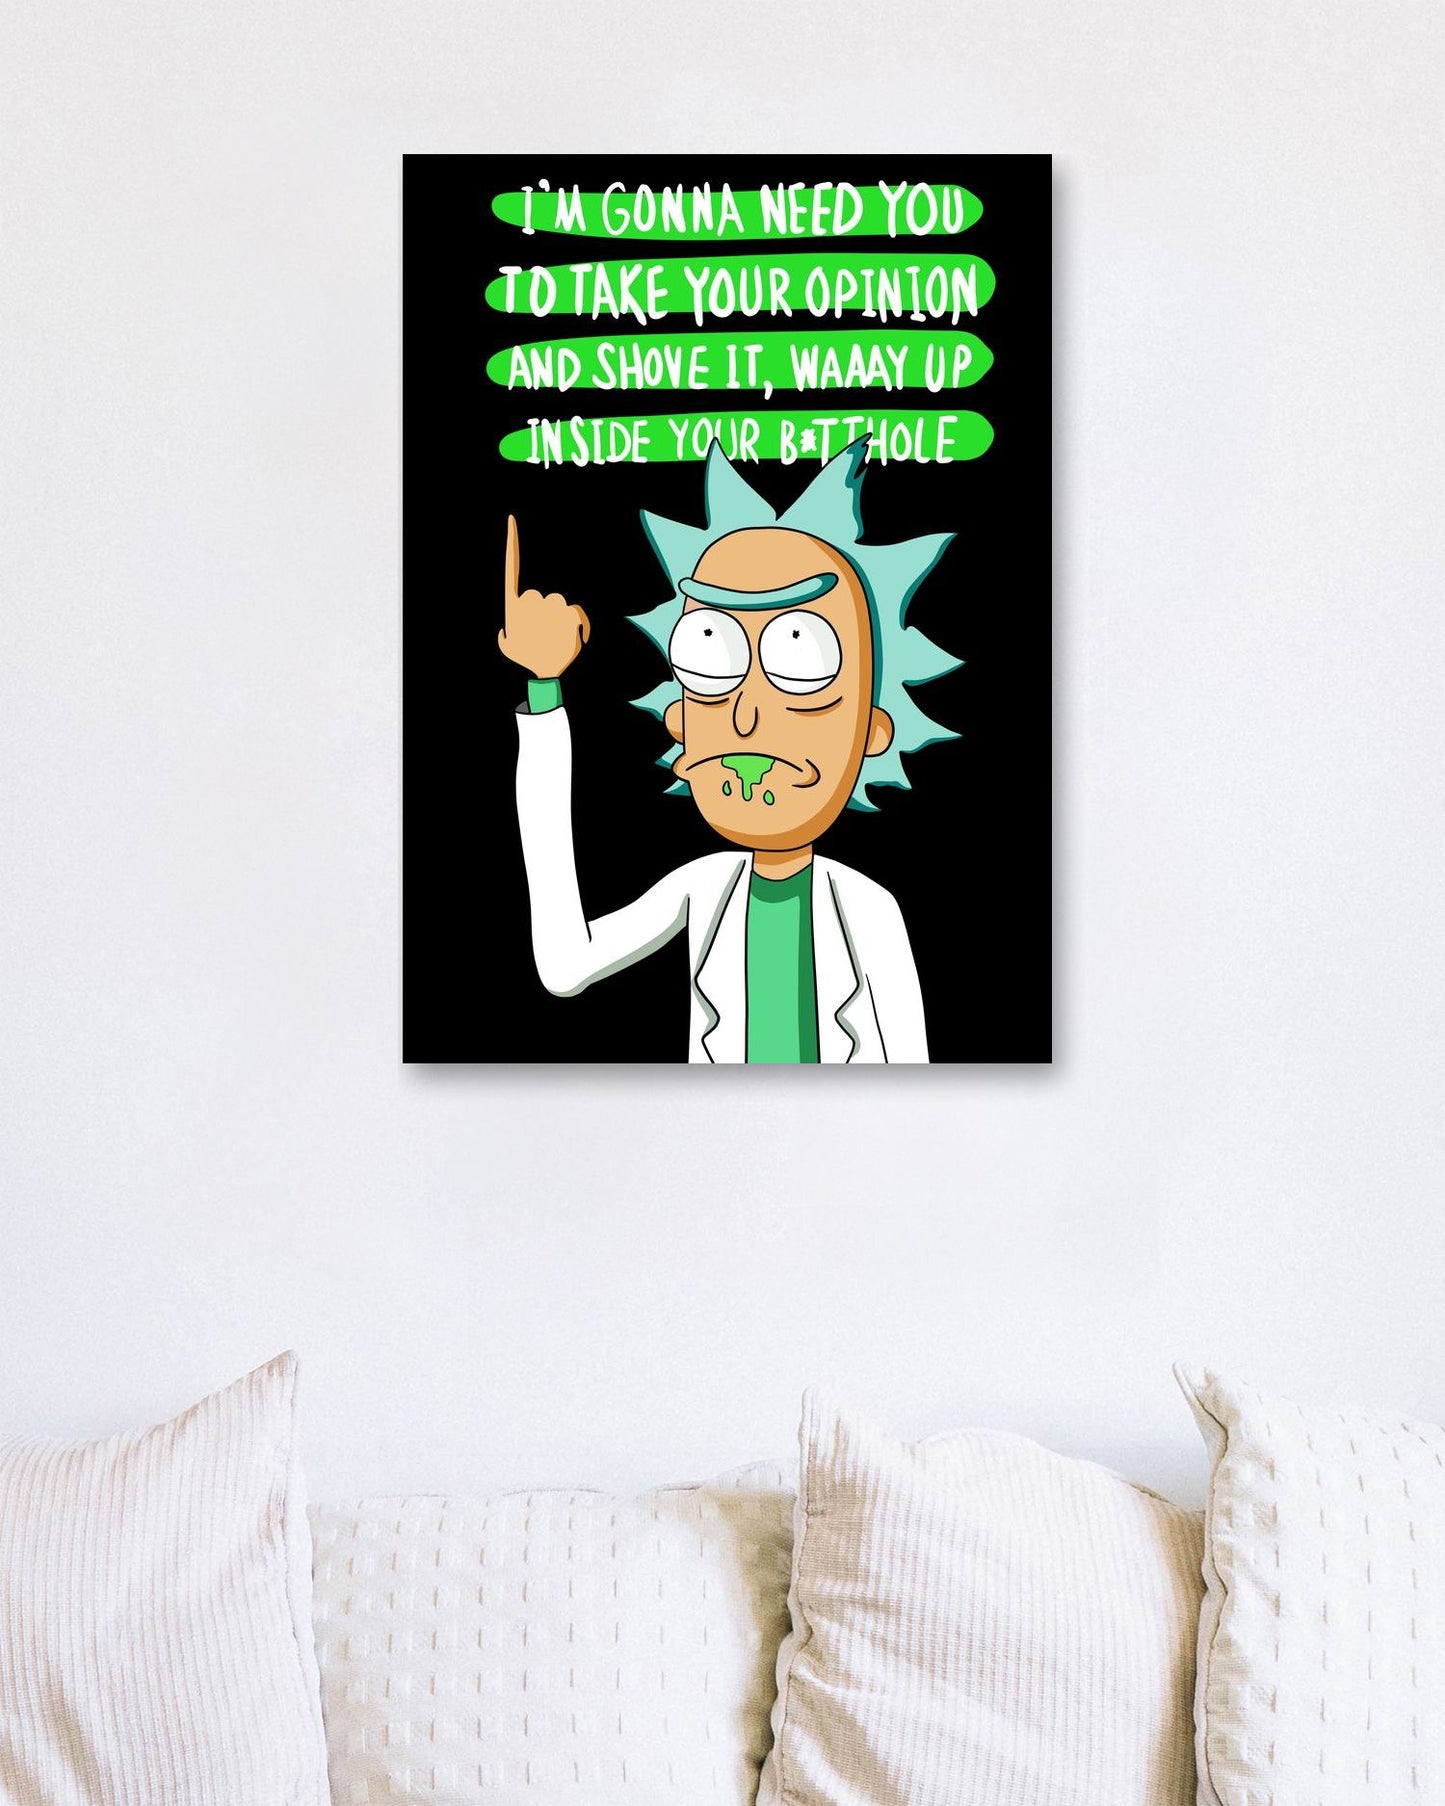 Rick and morty quotes 9 - @Yoho